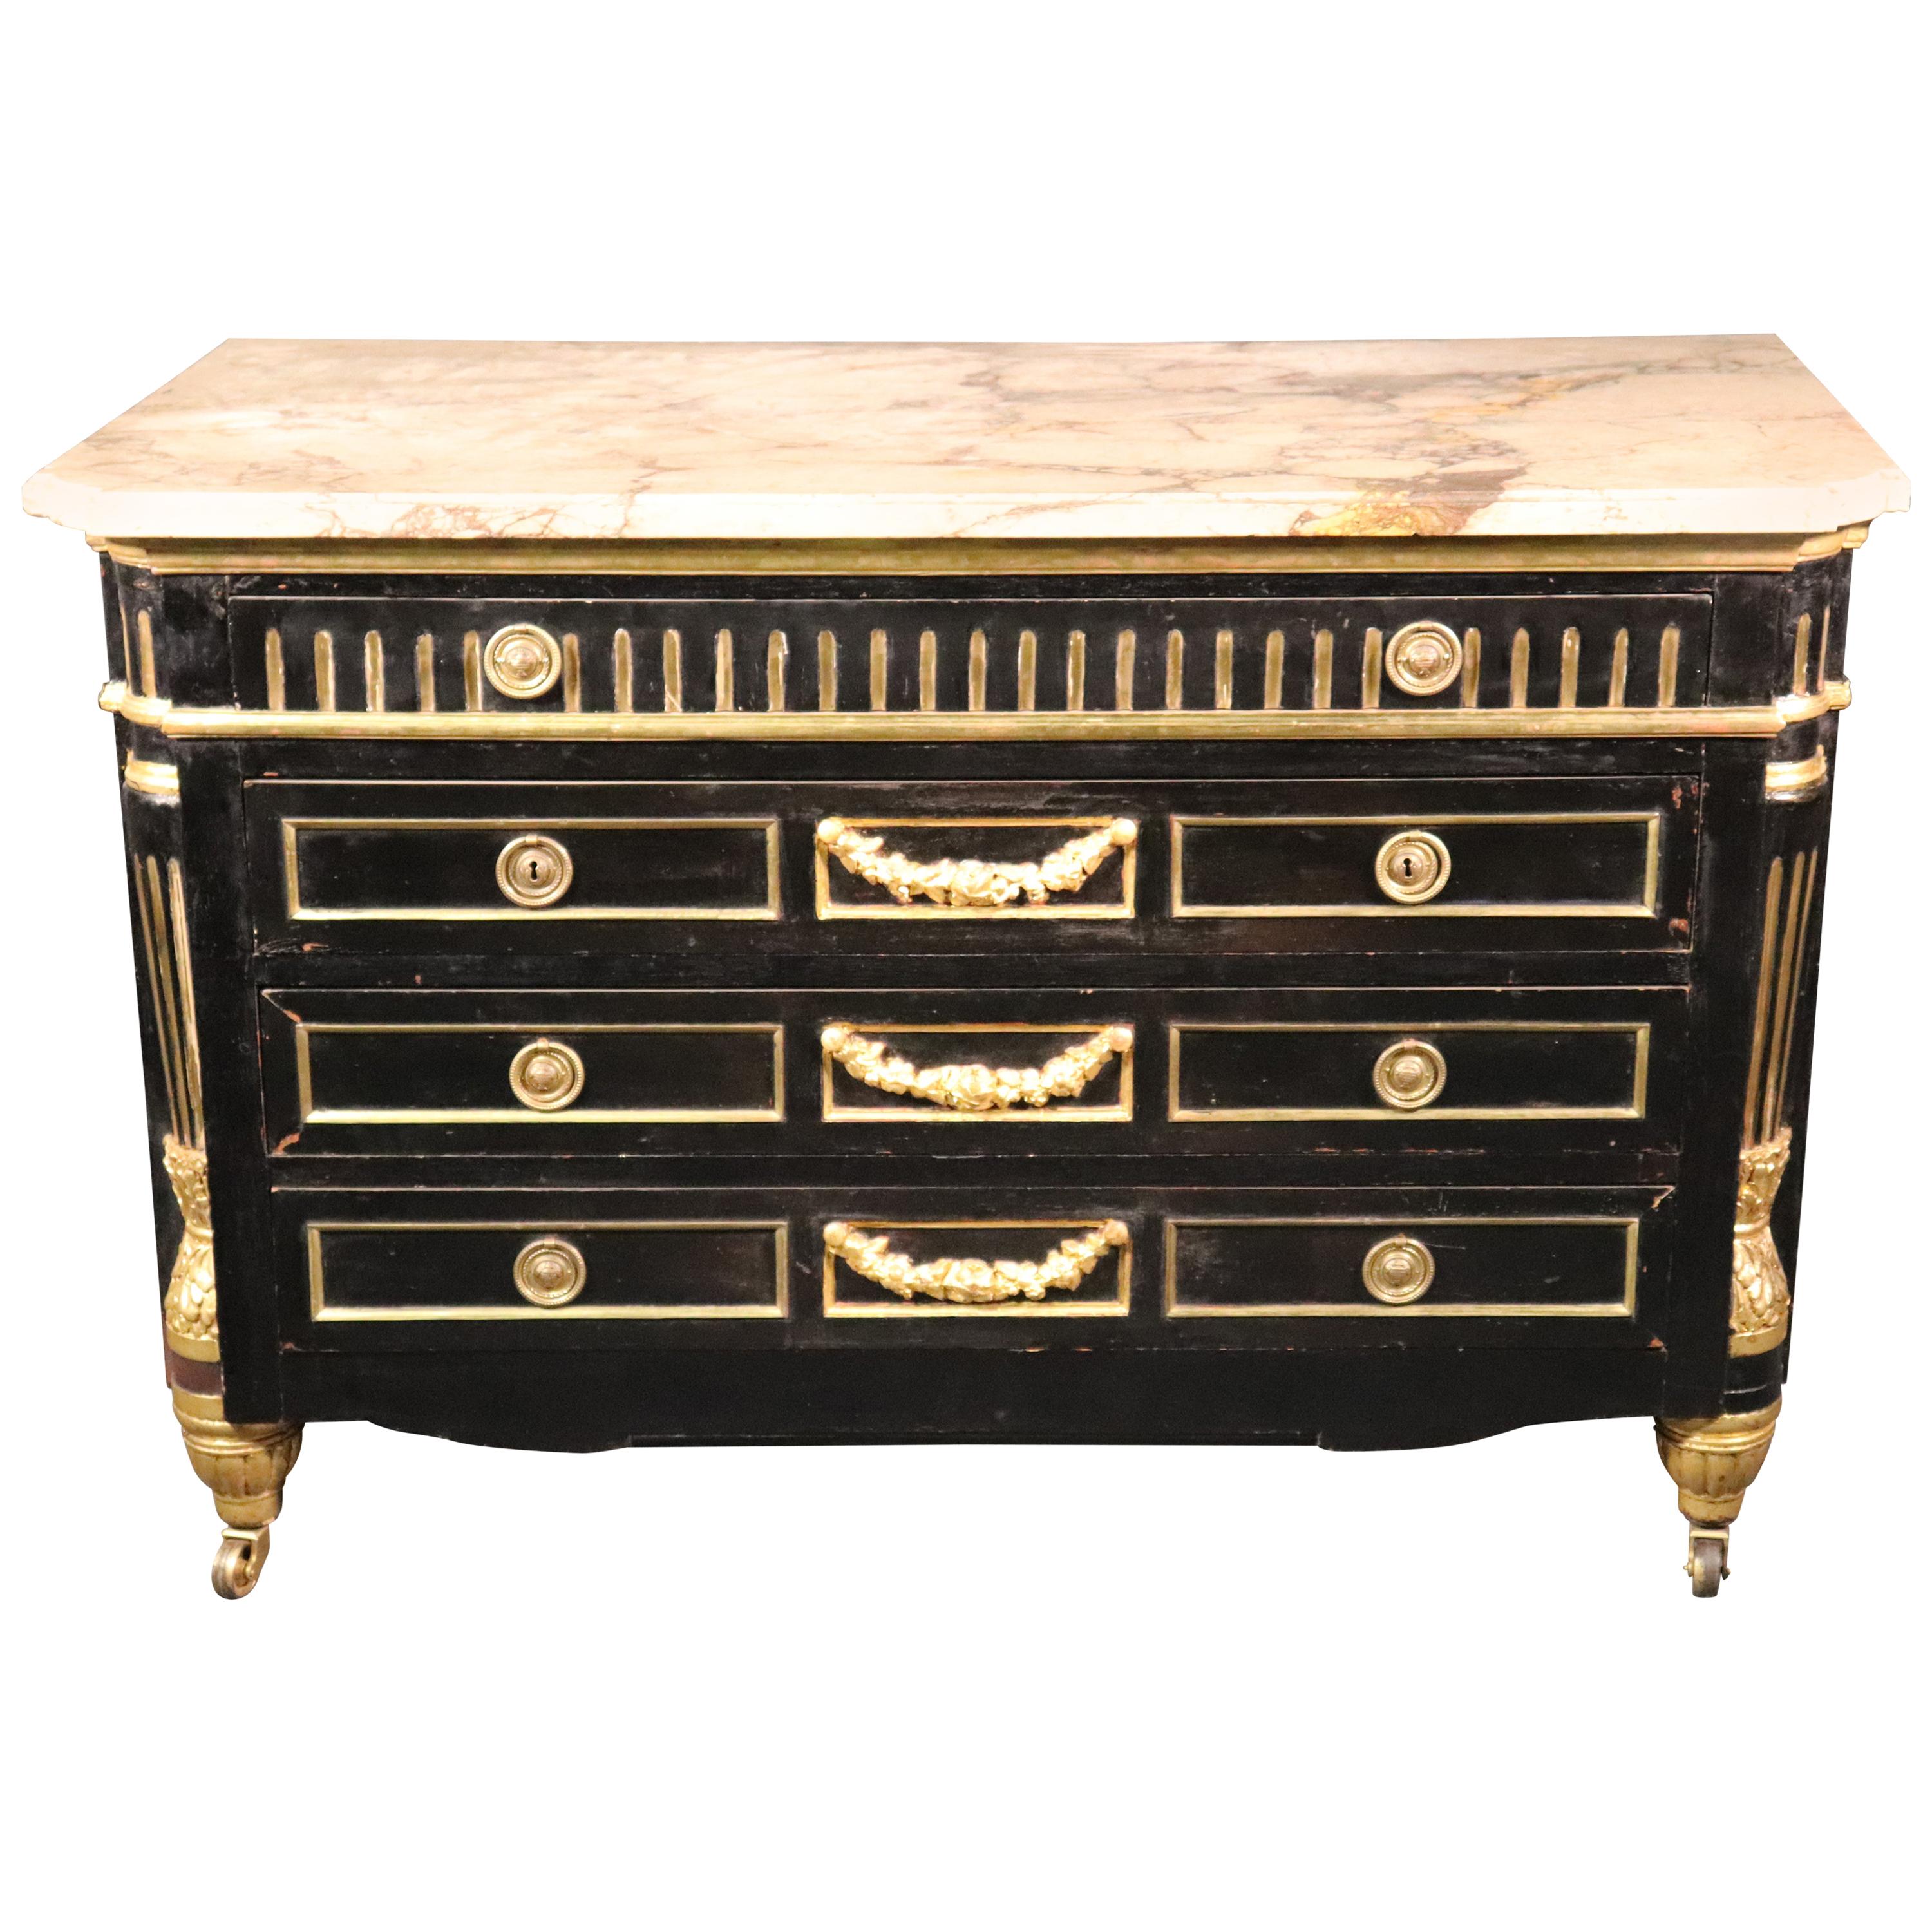 Ebonized and Gilded Russian Baltic Marble-Top Louis XVI Dresser Commode C1870